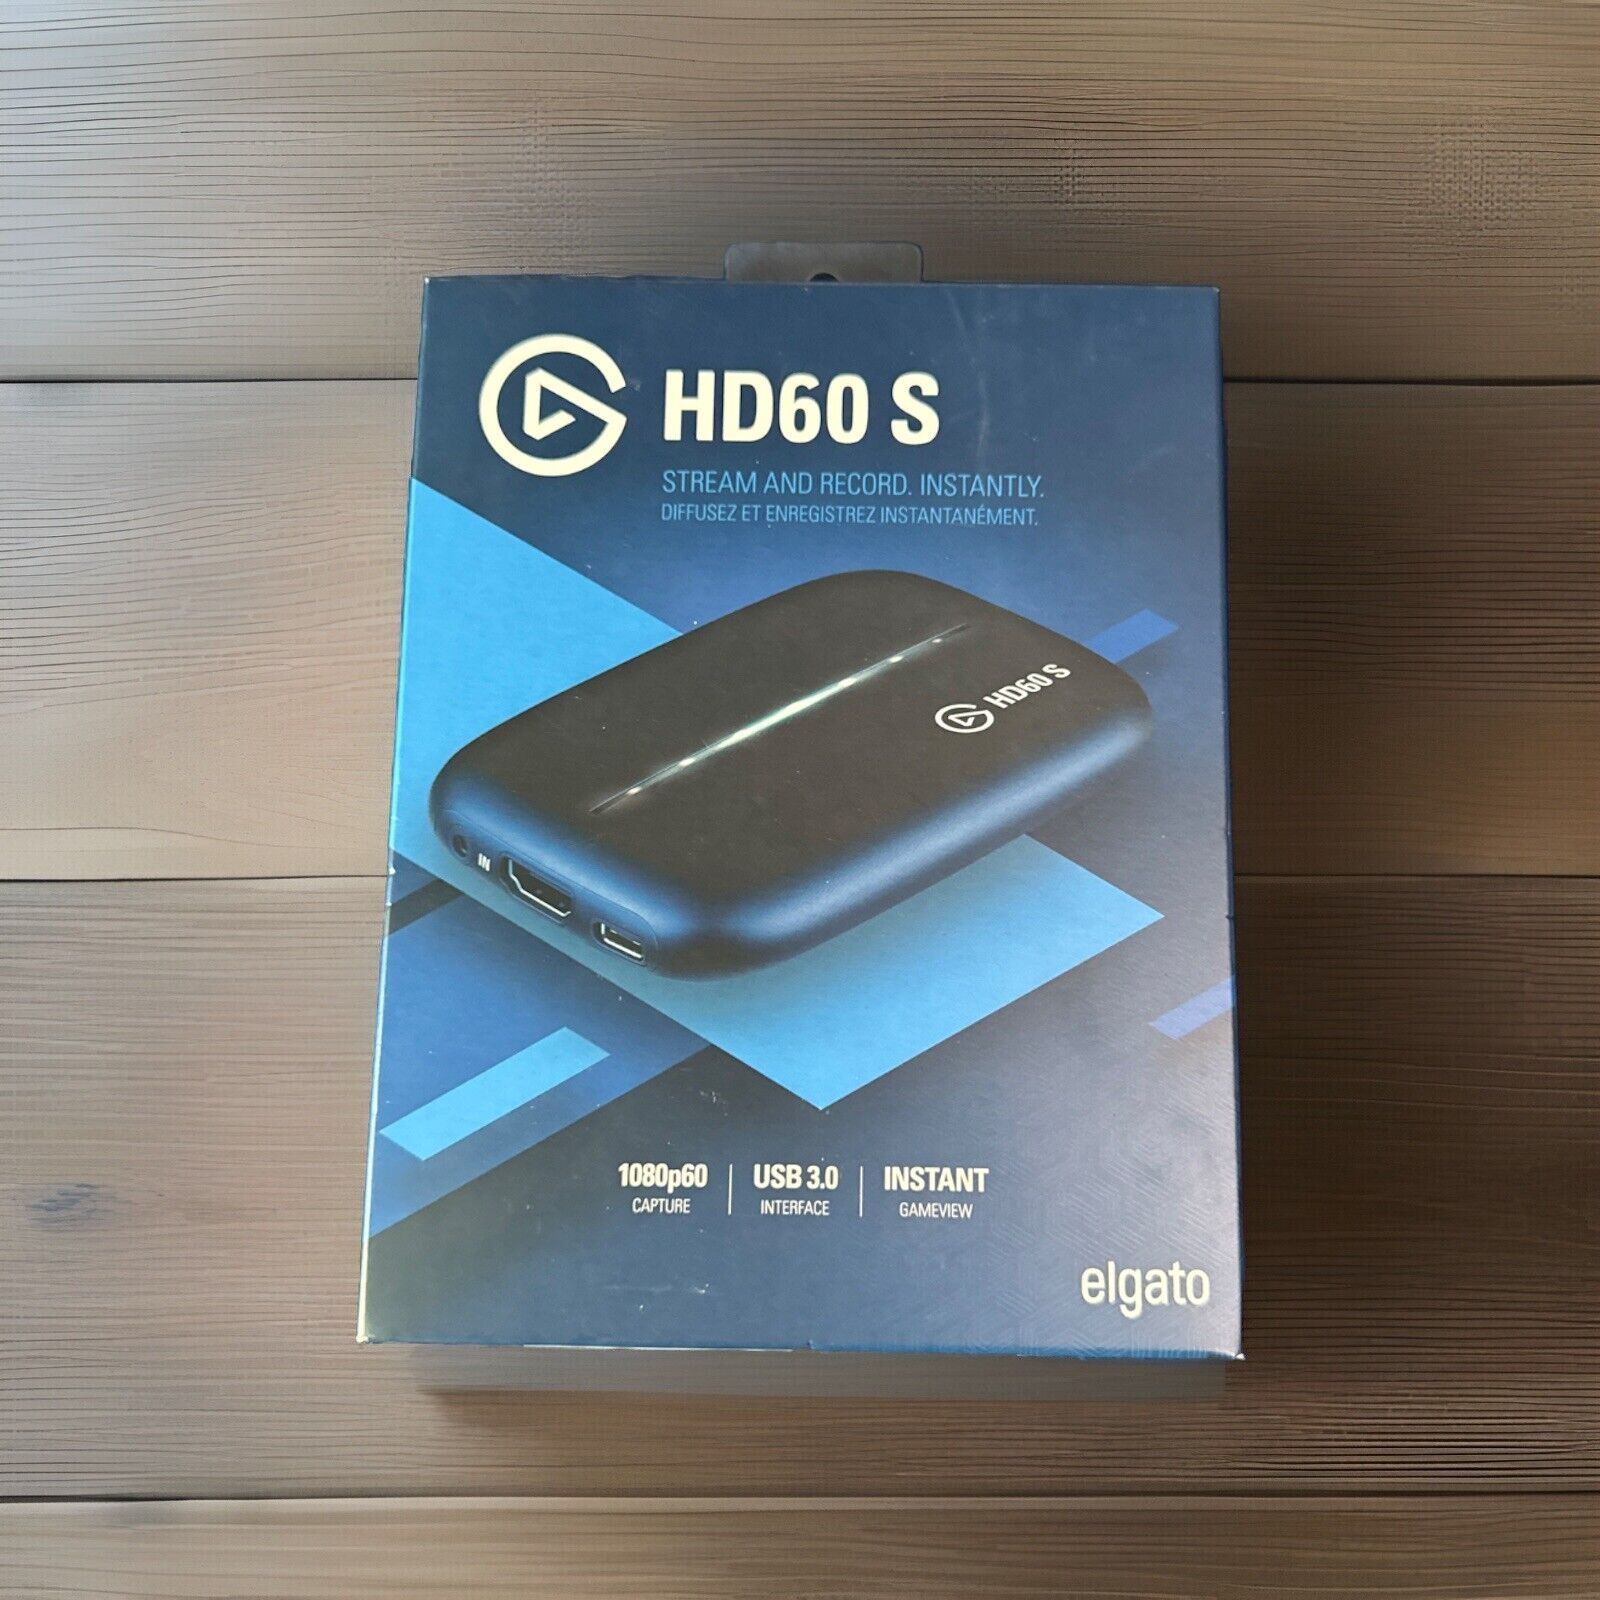 Elgato HD60 S With Original Box/Power cord, Chat link Cable Included.